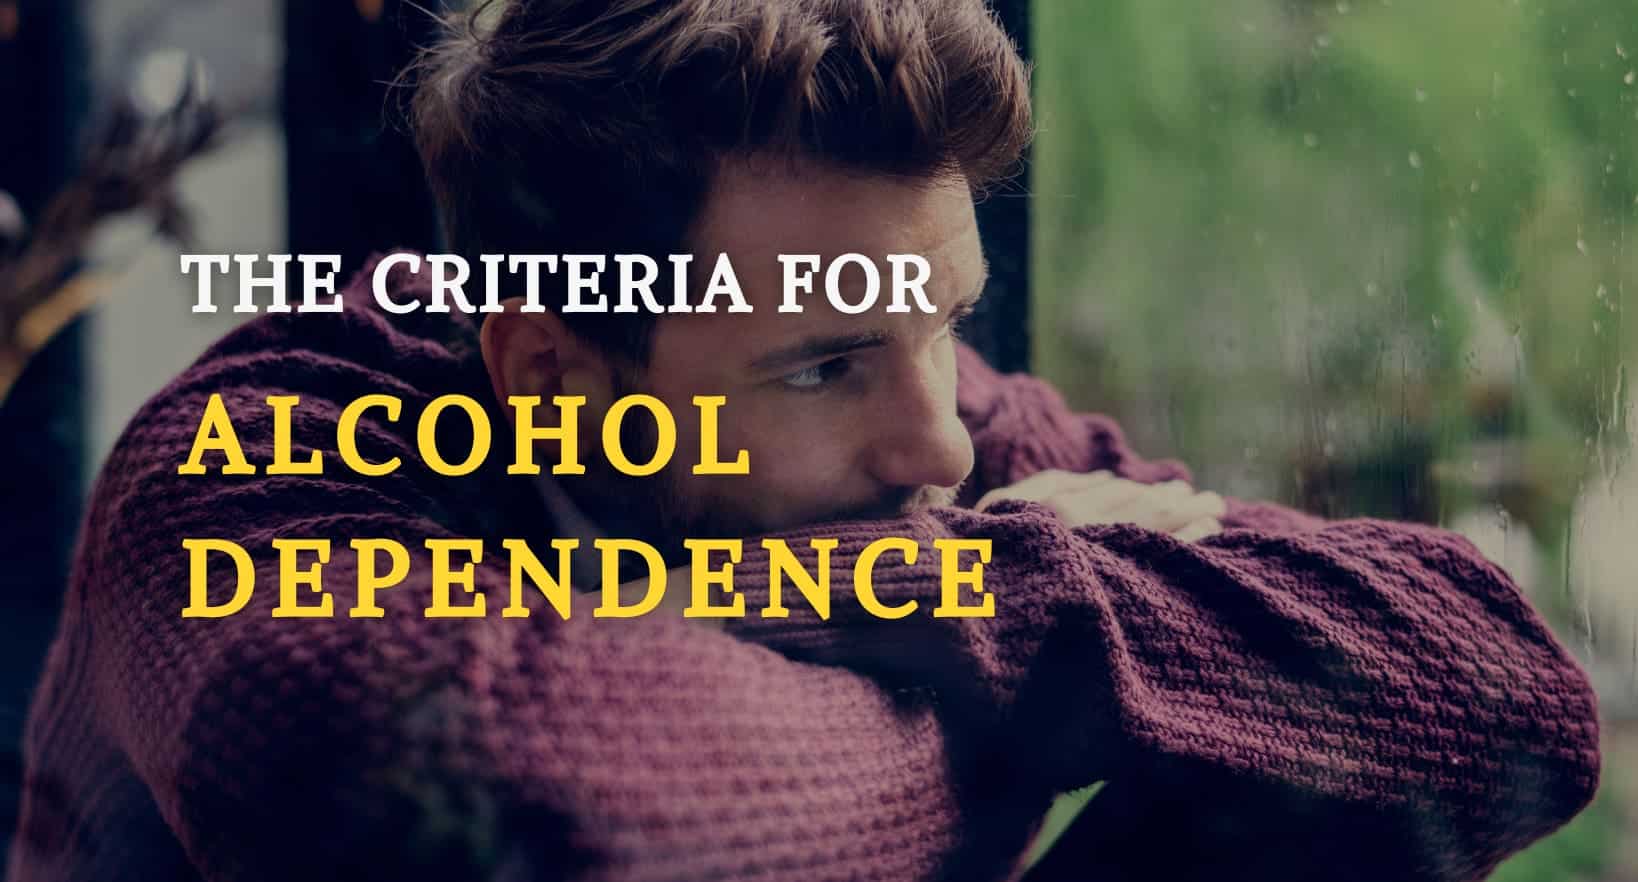 A man suffers from alcohol dependence.